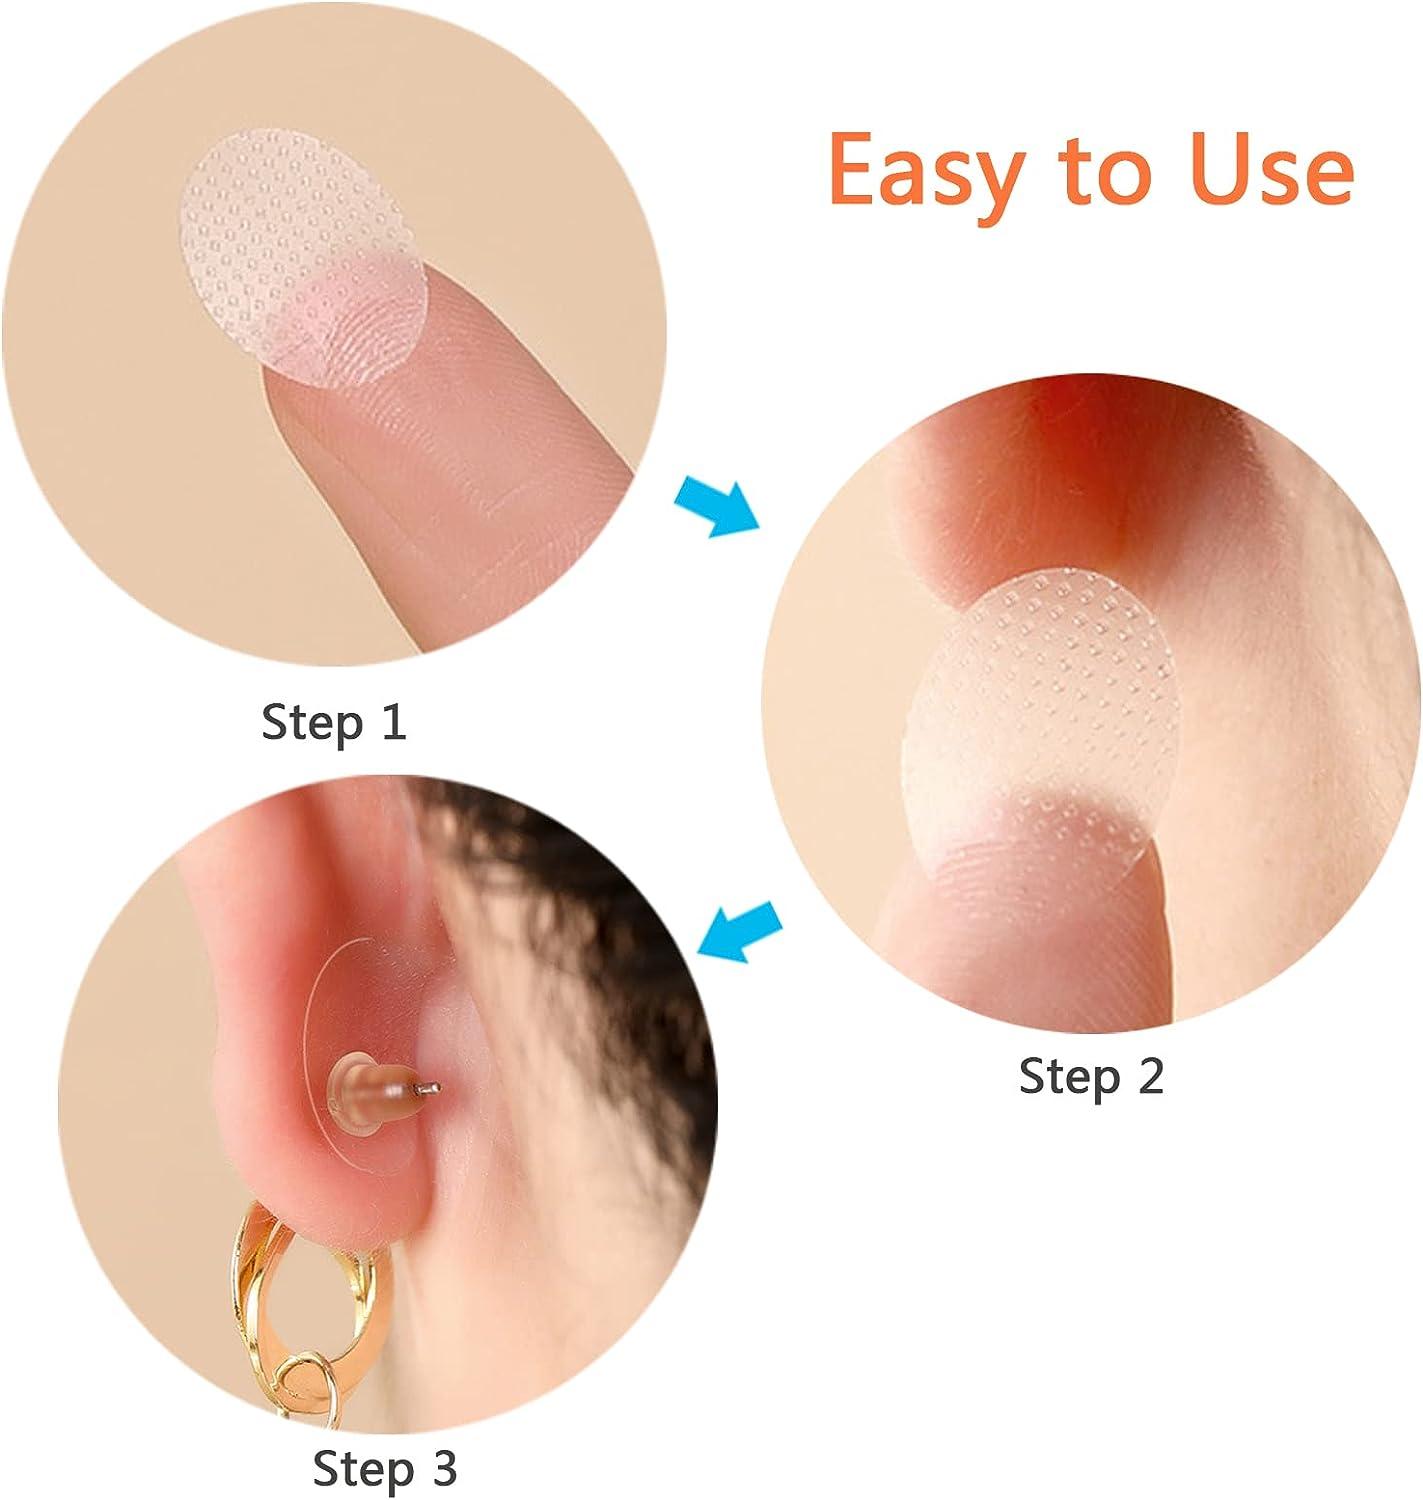 200 Pieces Ear Lobe Support Patches for Heavy Earrings, Breathable Earrings  Support Pads Large Earring Patches Heavy Earrings Stabilizers for Long